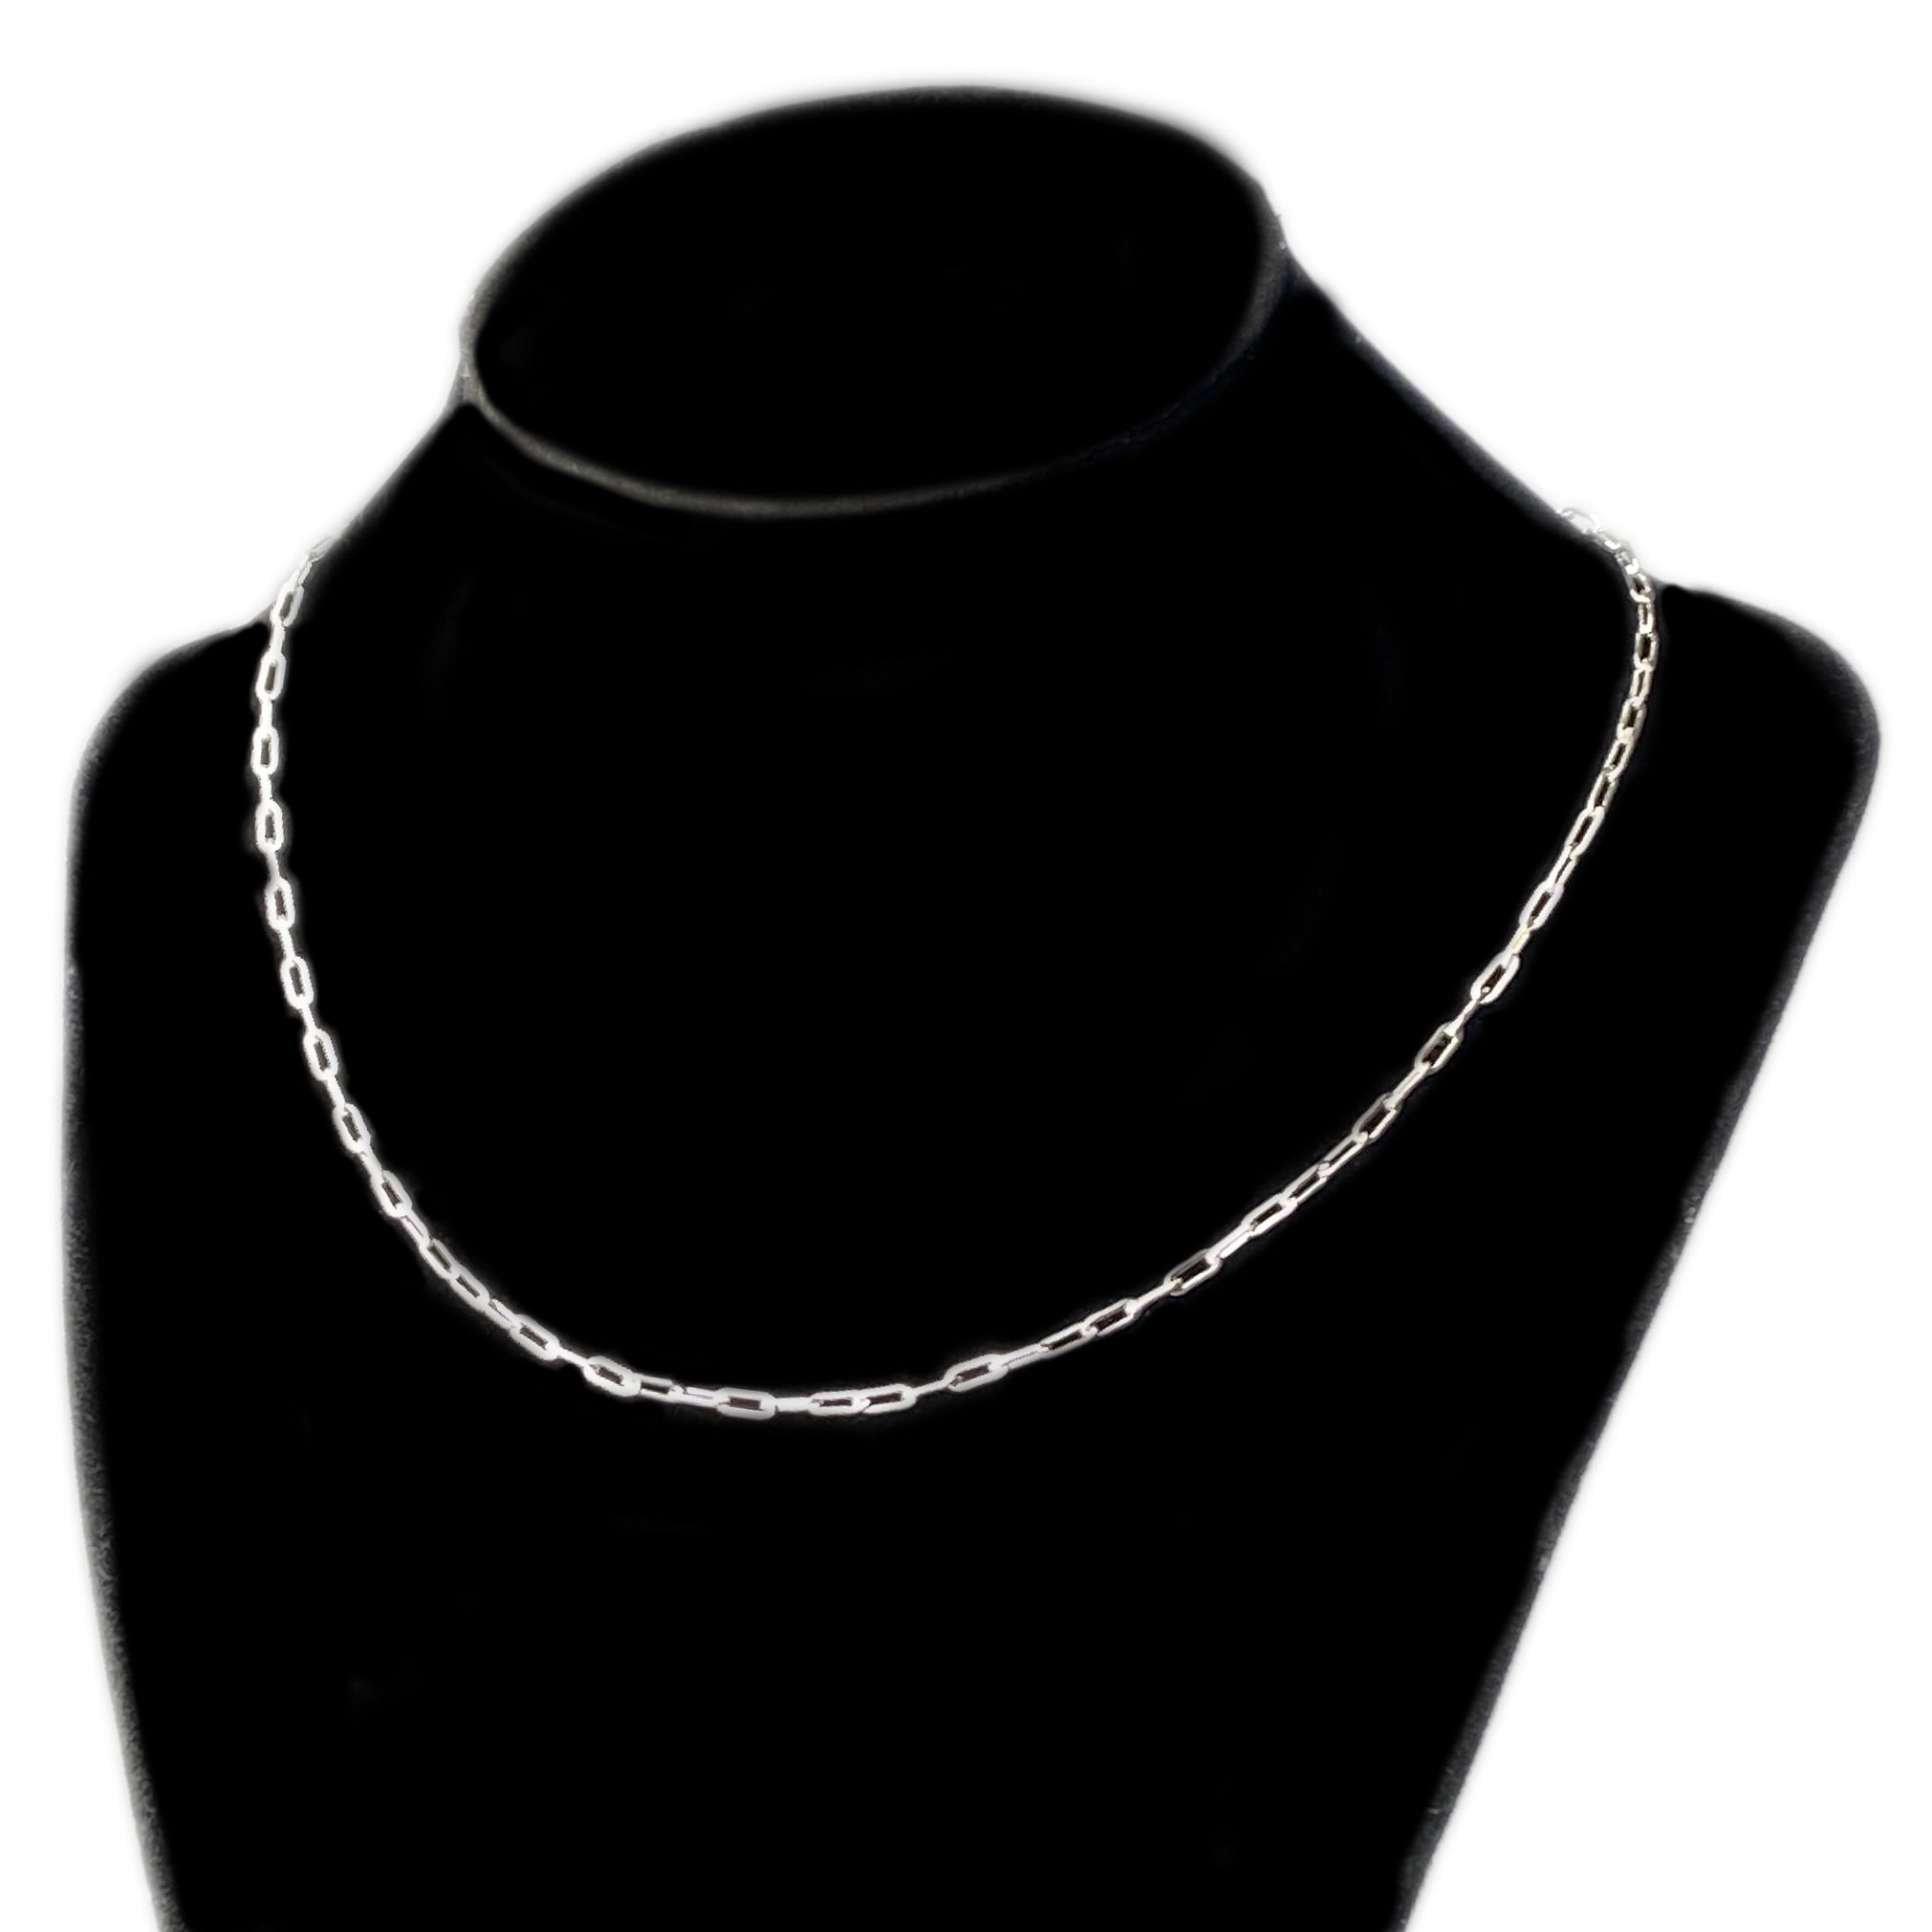  OCHCOH 925 Sterling Silver Clasp 2.5/3/4/5mm Paperclip Chain  for Women Silver Chain Necklace 16, 18, 20, 22, 24, 26, 30 Inches :  Clothing